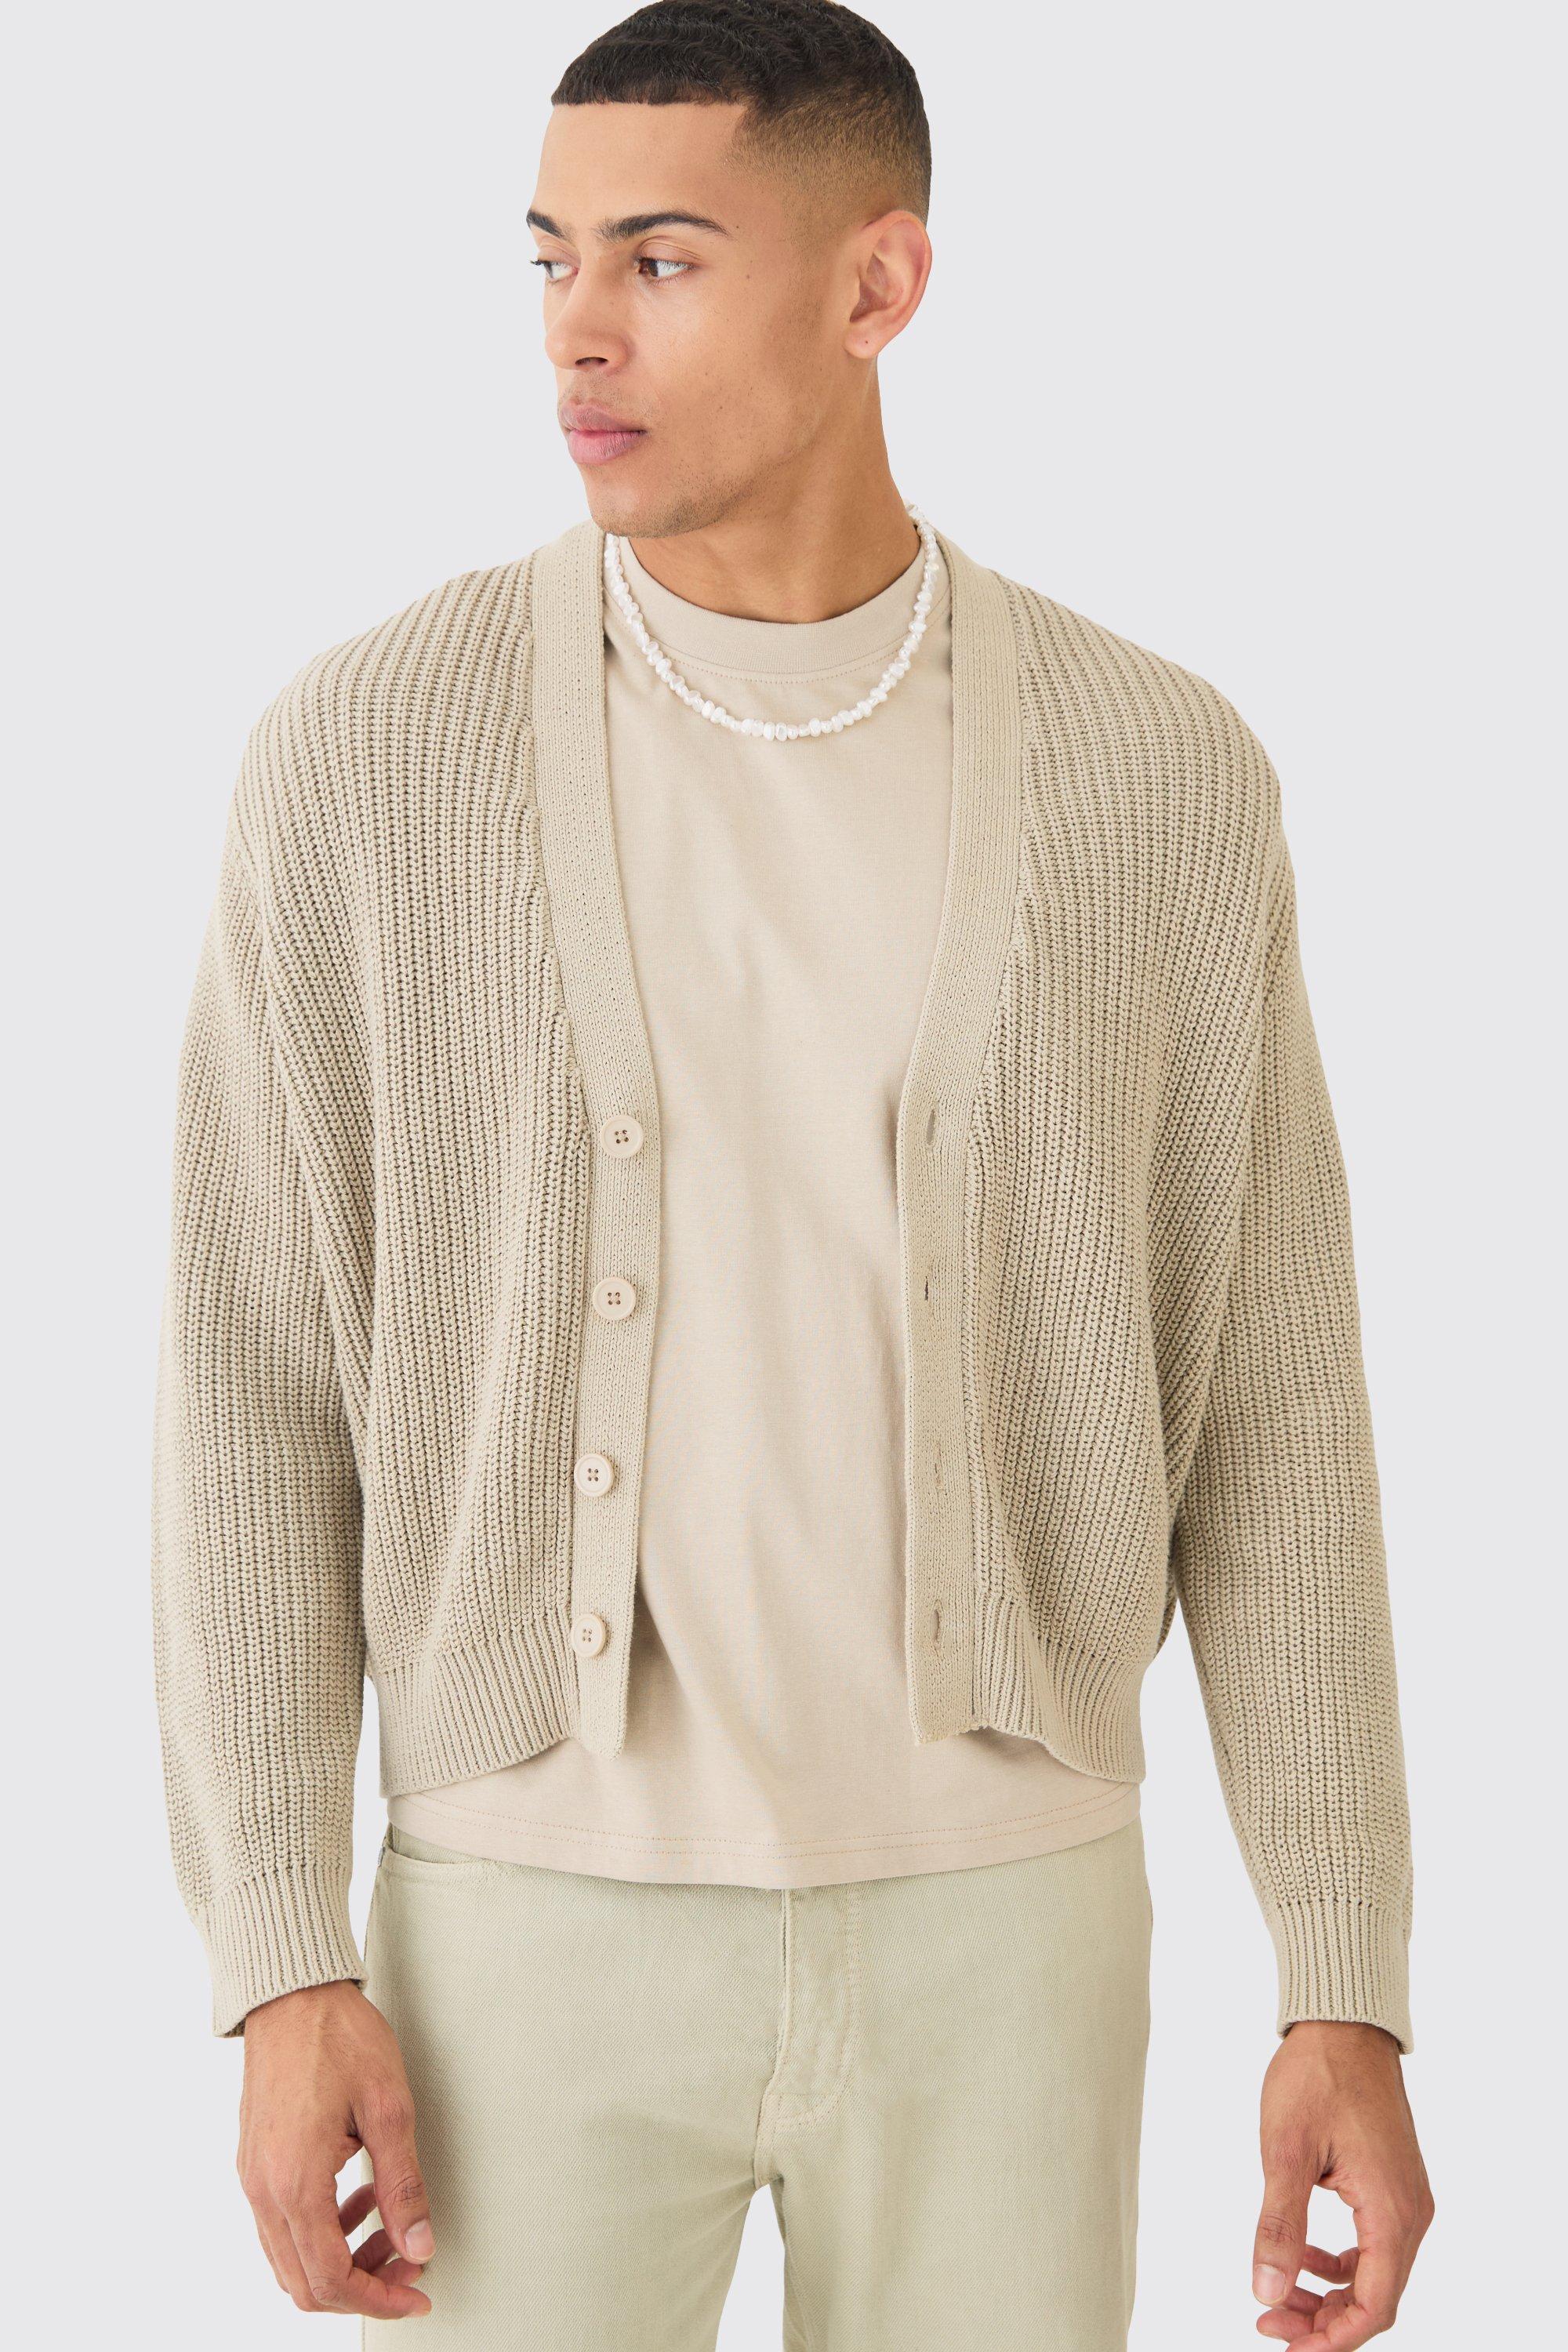 Image of Boxy Fit Ribbed Fisherman Knit Cardigan, Beige